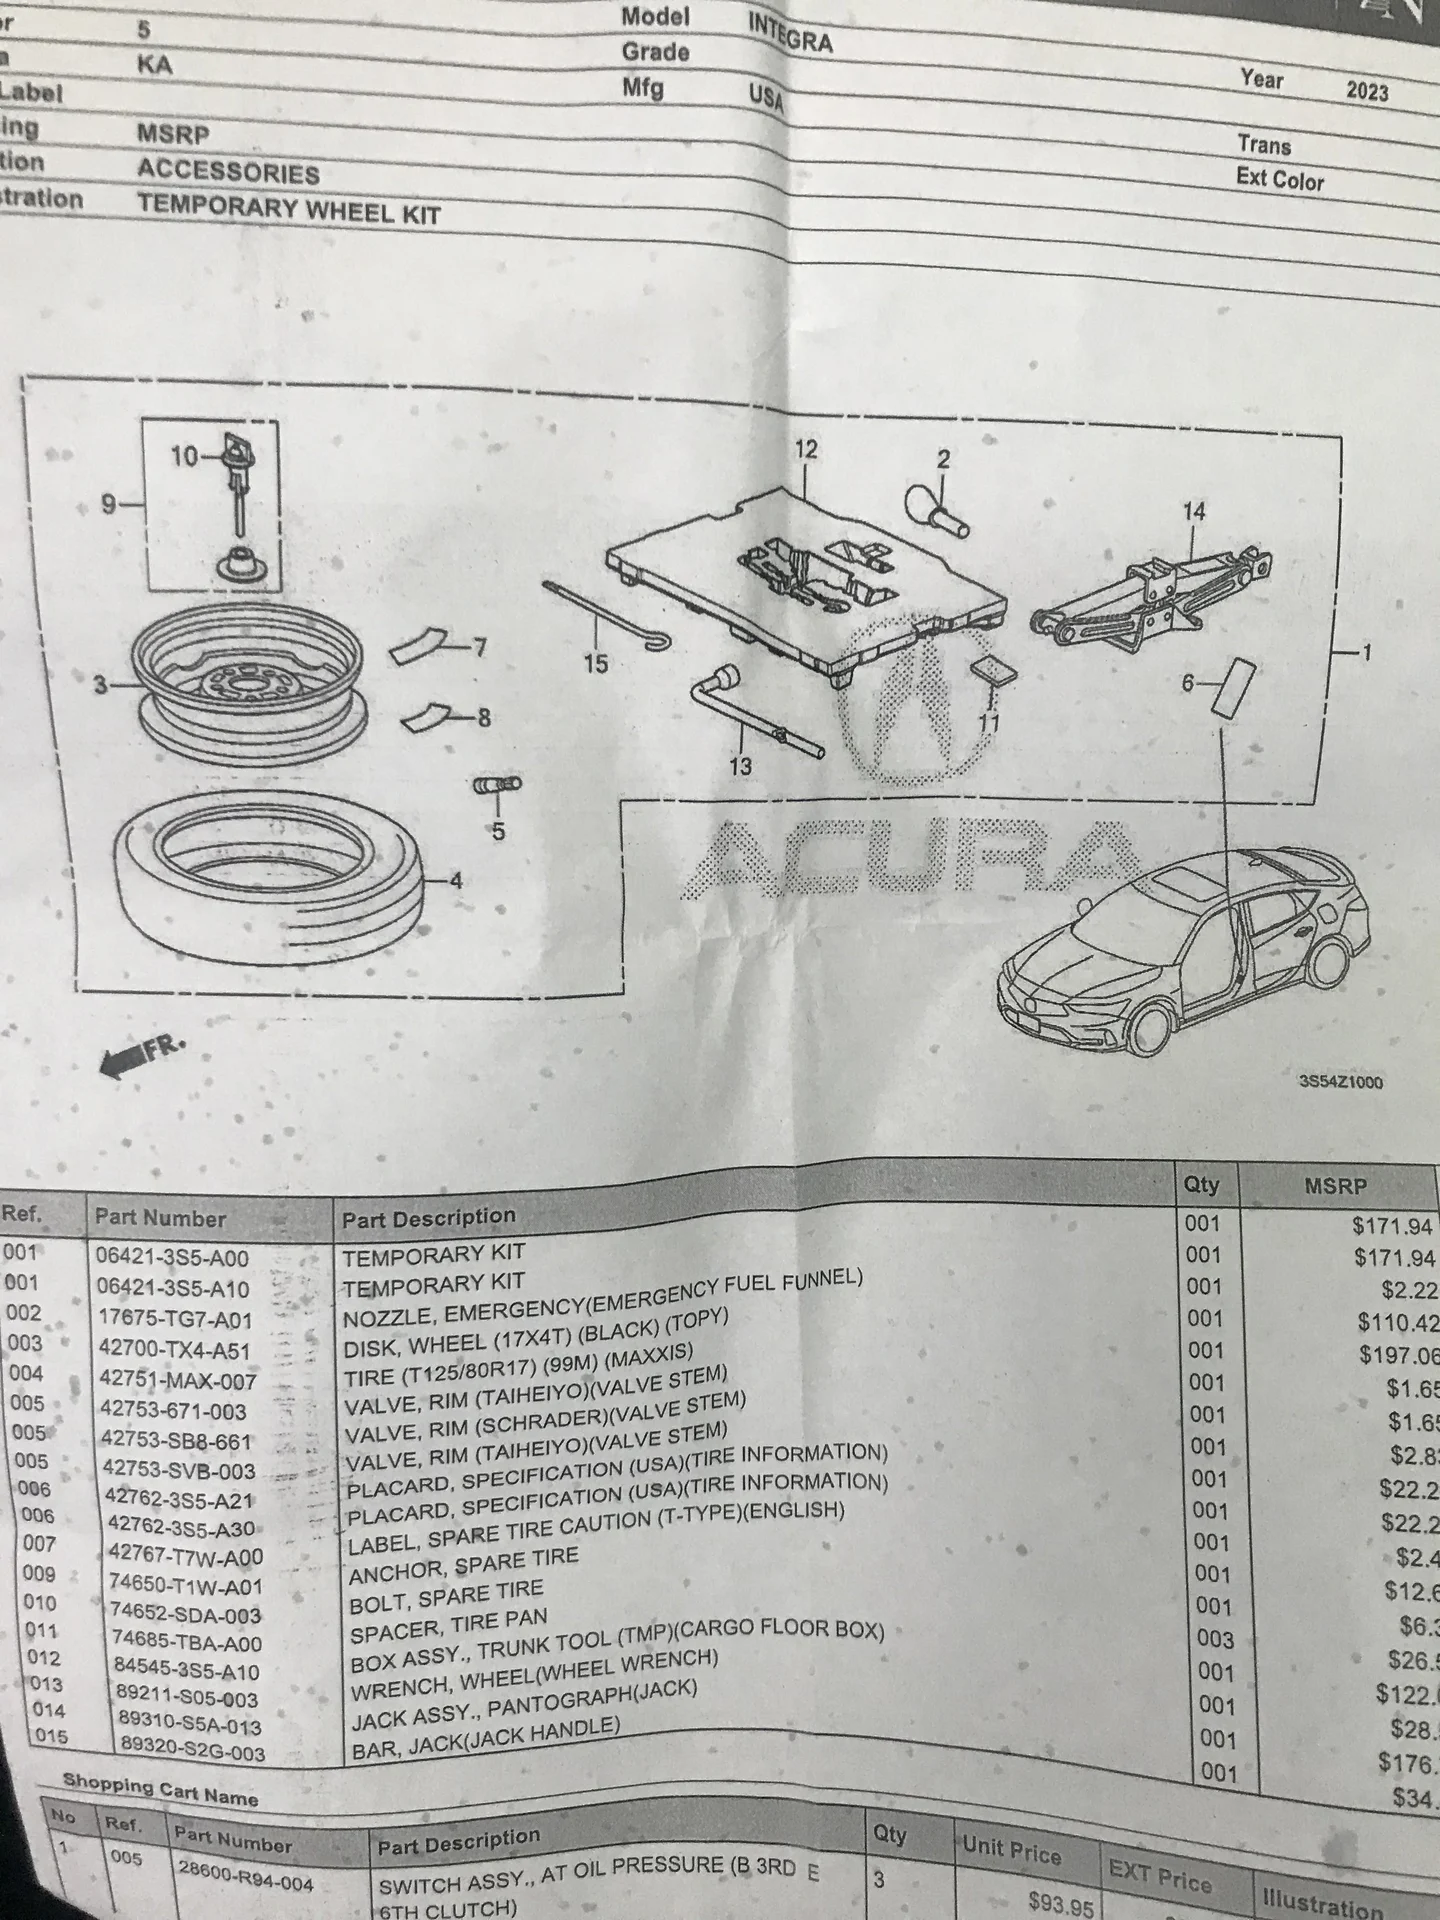 Diagram and parts list for 2023 Acura Integra spare tire kit and parts